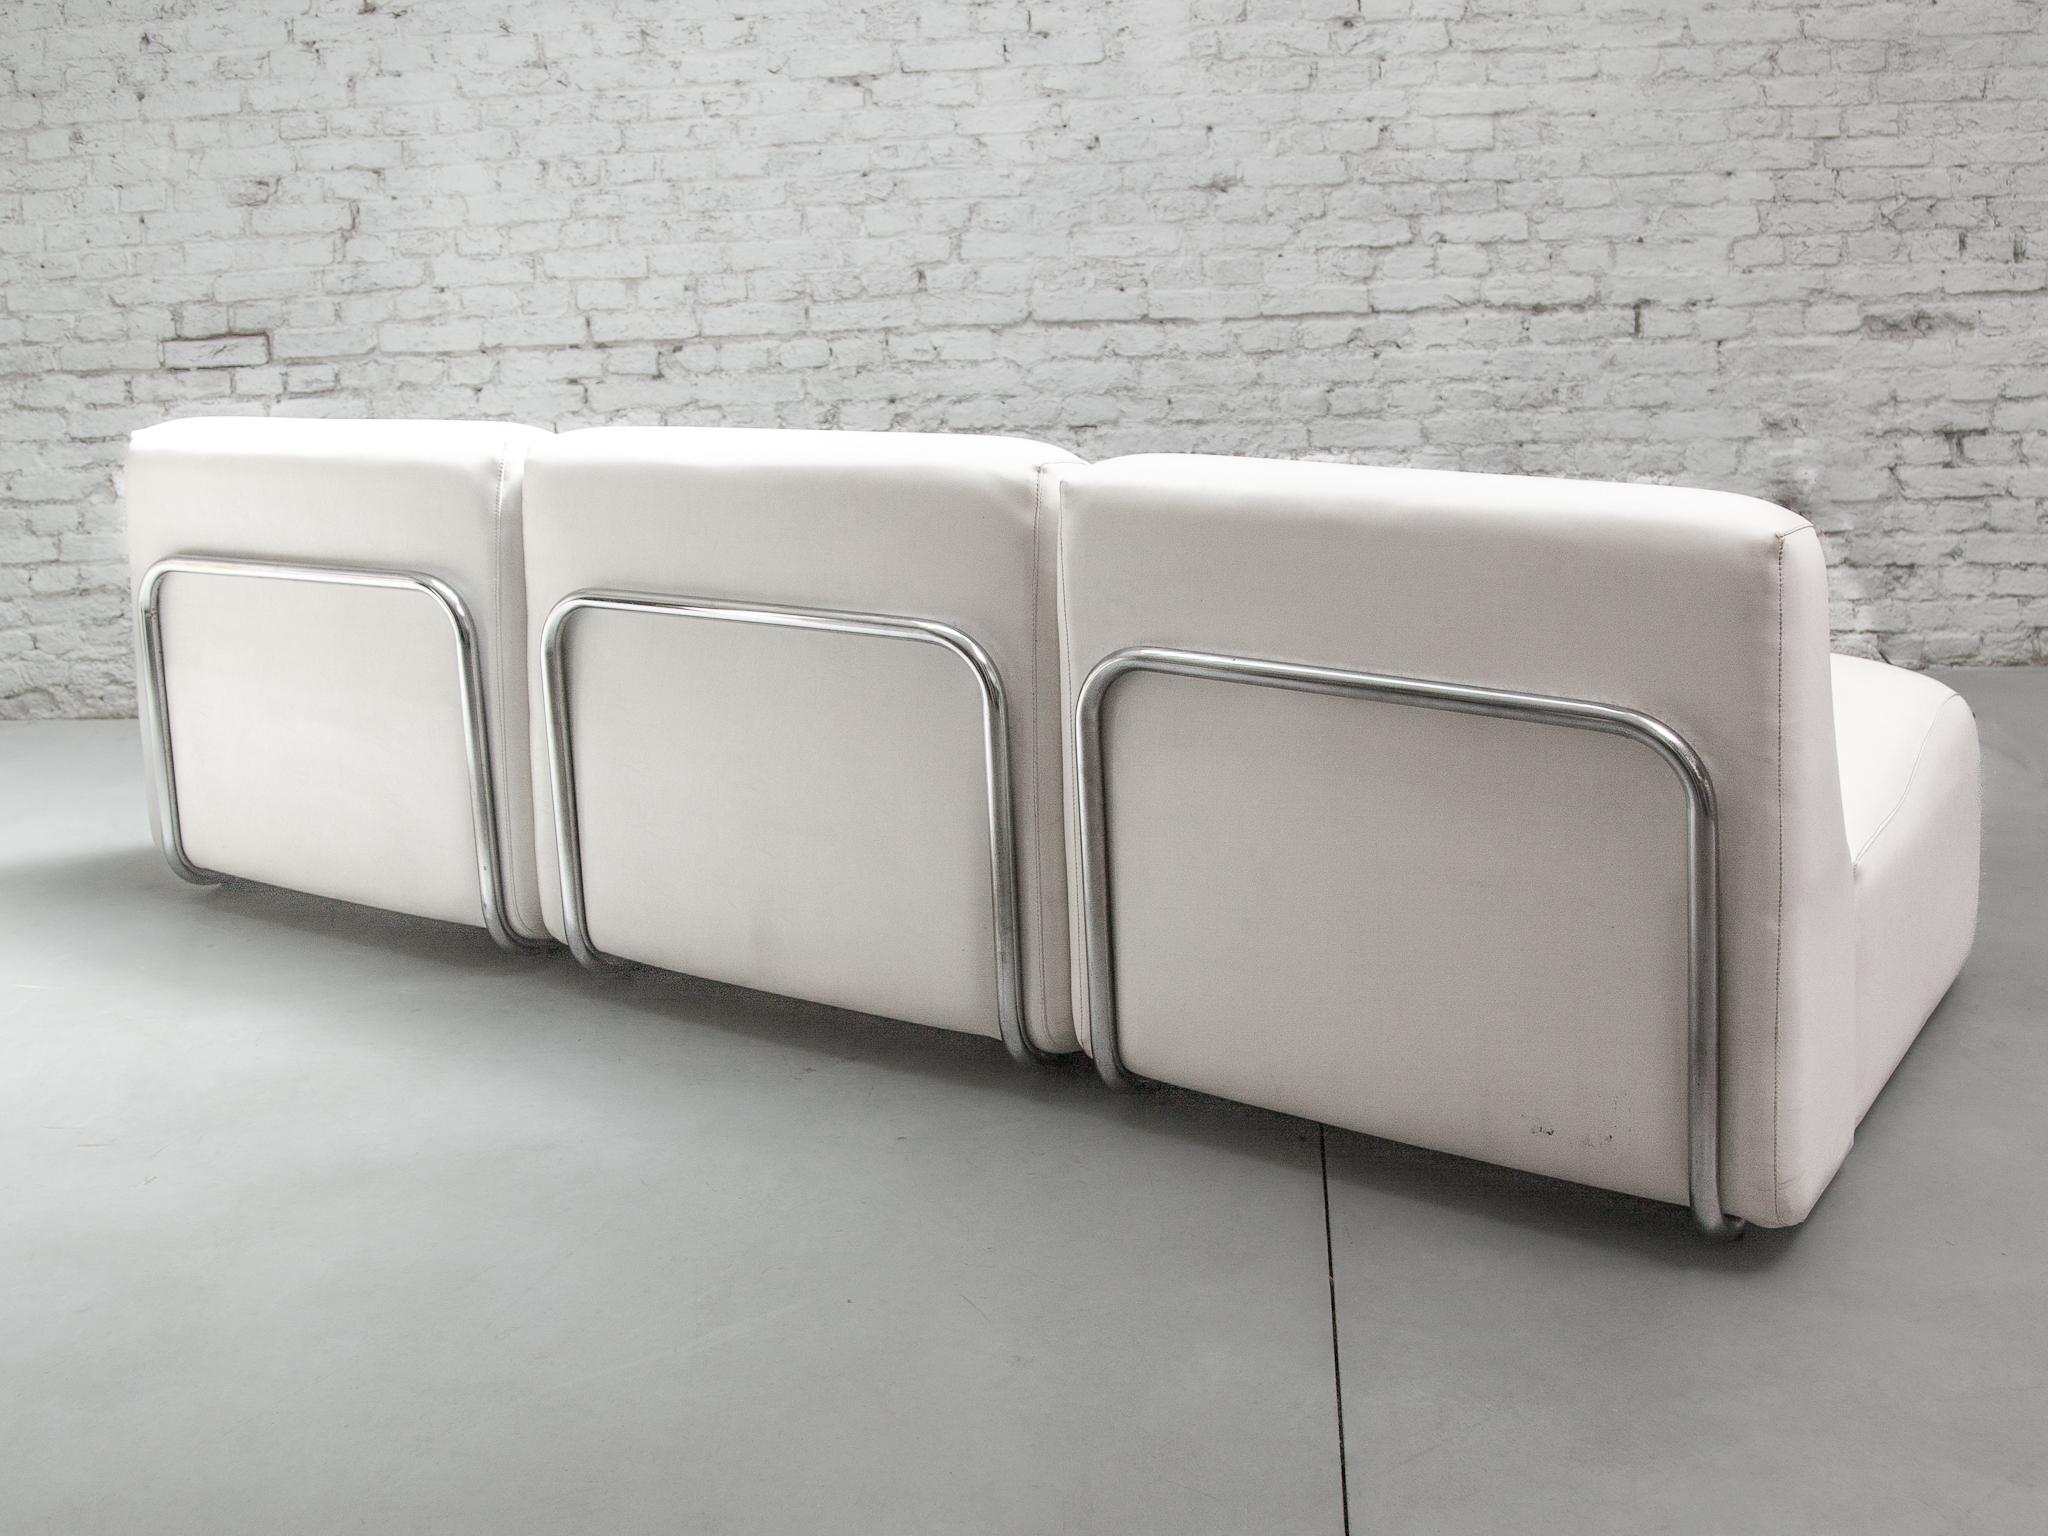 Modular Eight Chairs Living-roomset of Adriano Piazzesi Lounge Chairs and Stools 3